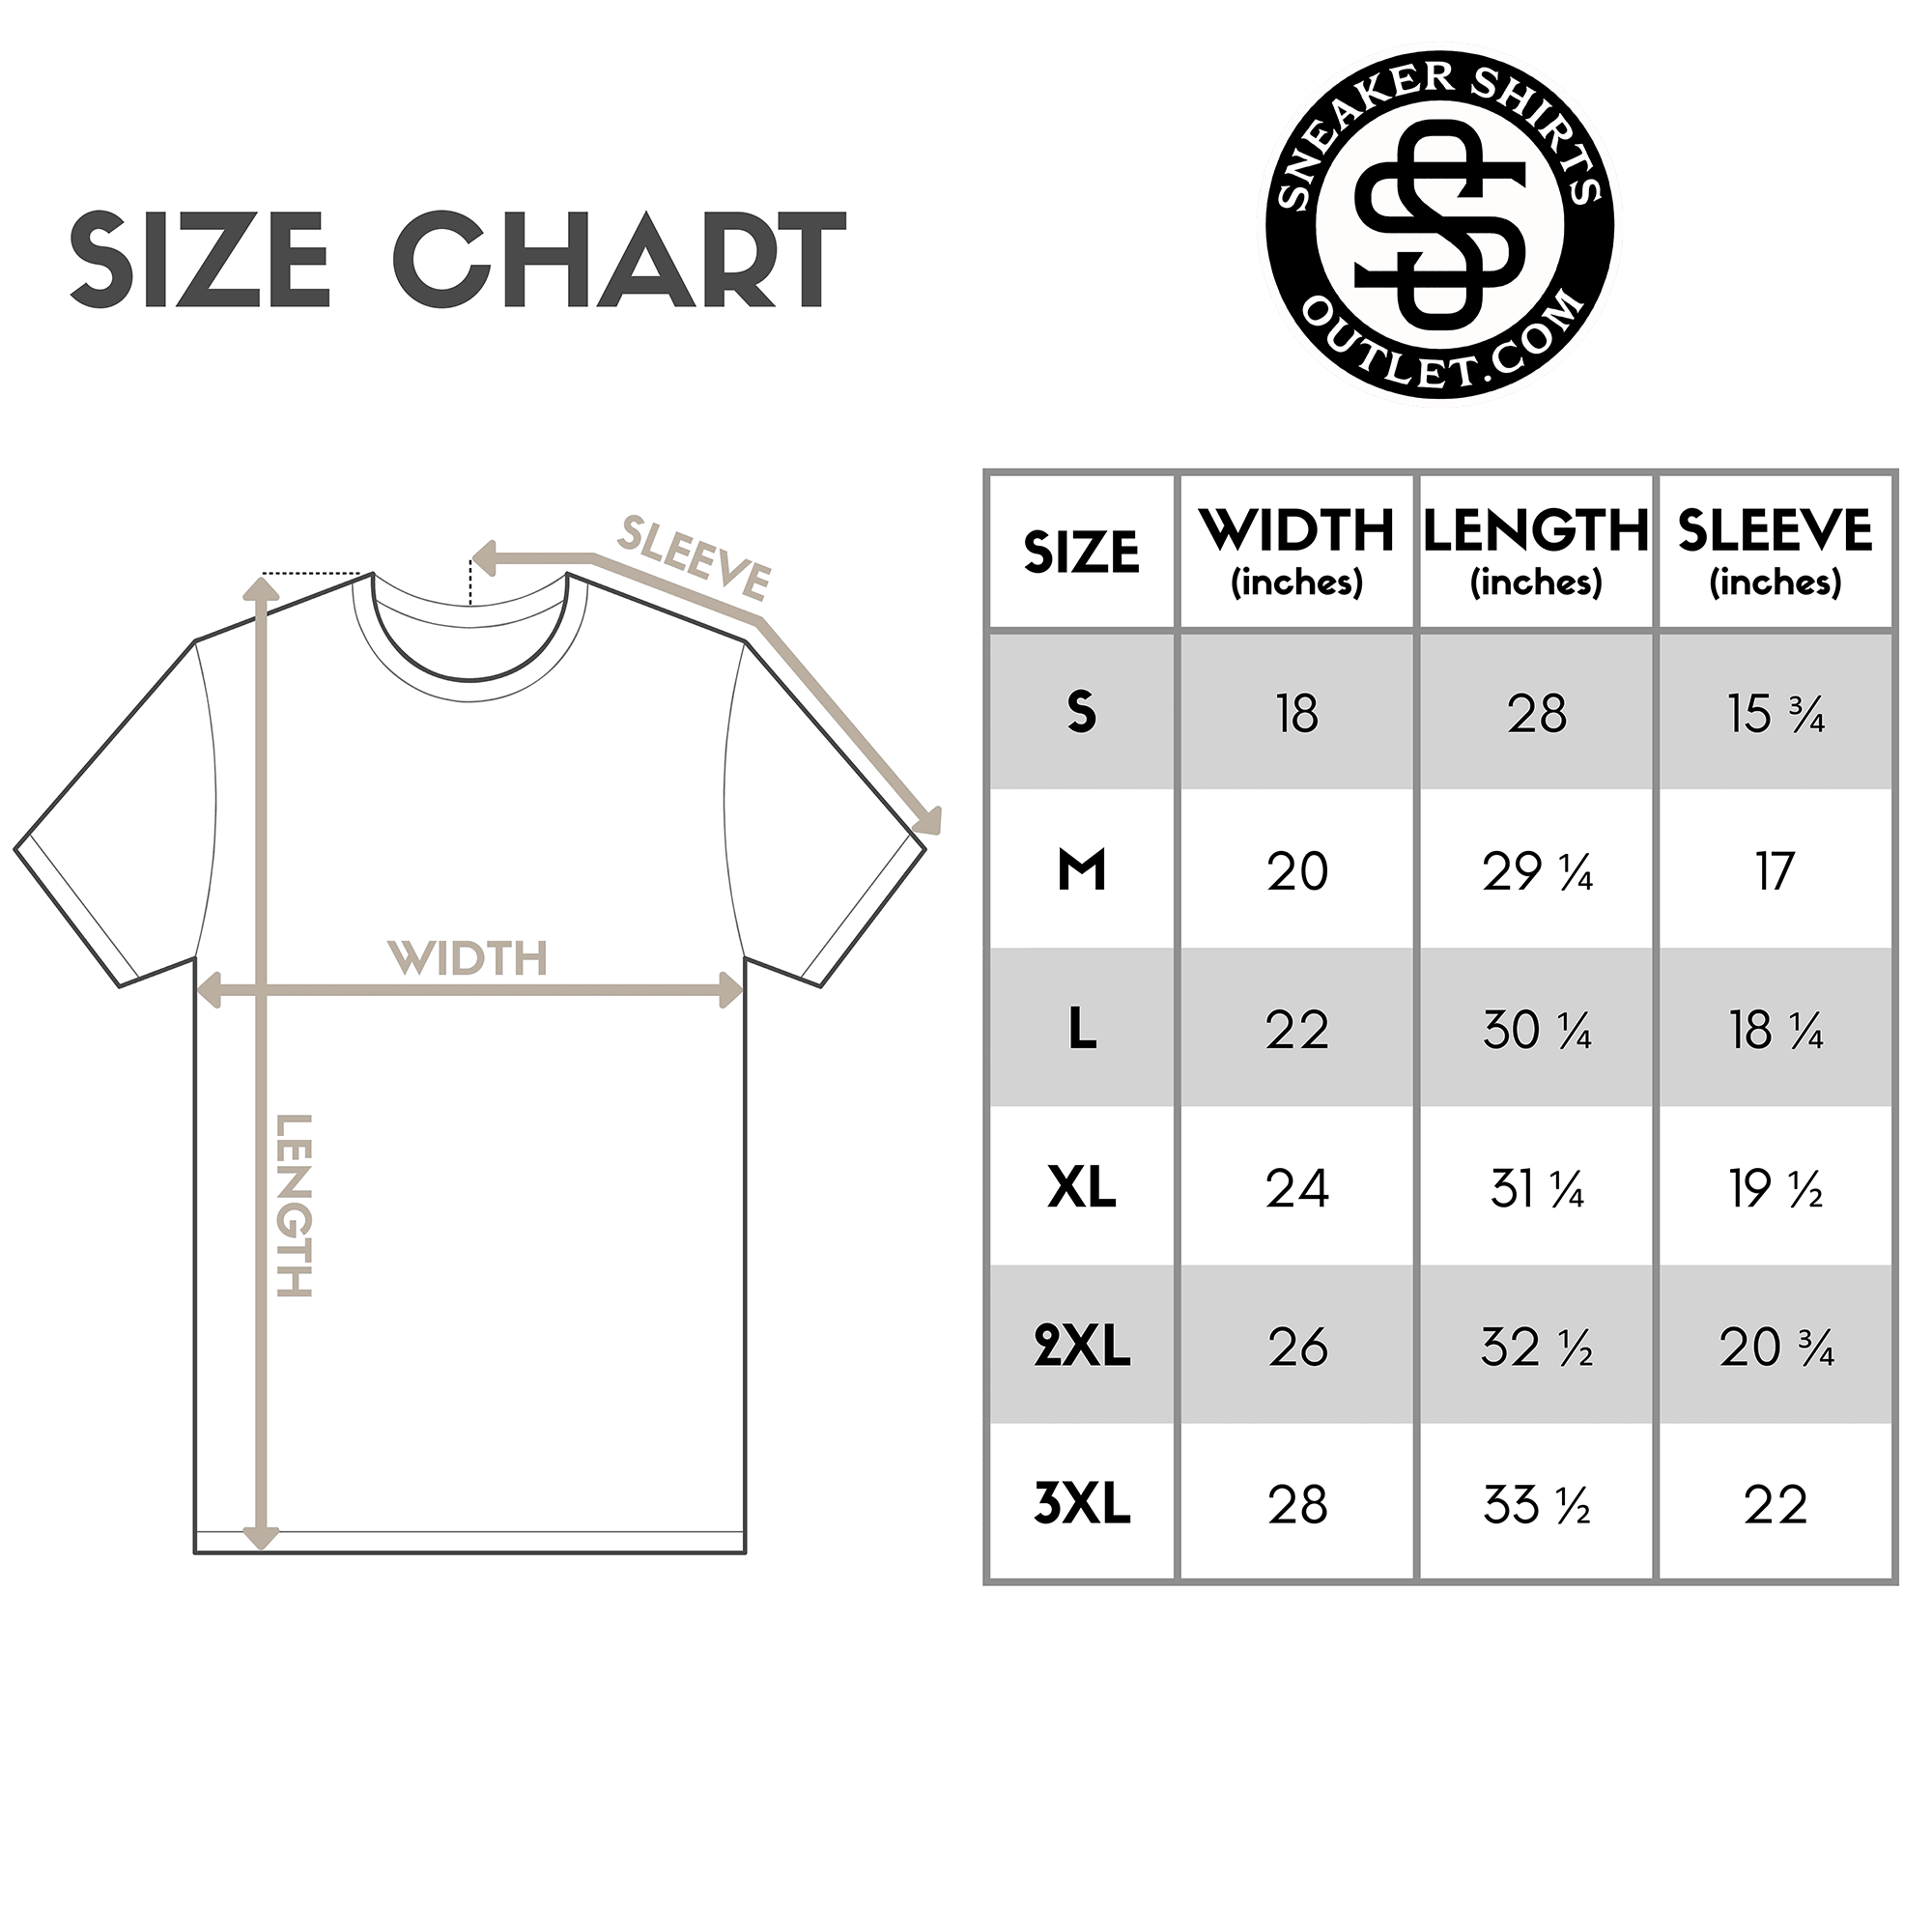 size chart Shine Different Shirt Yeezy Boost 700s Bright Blue photo